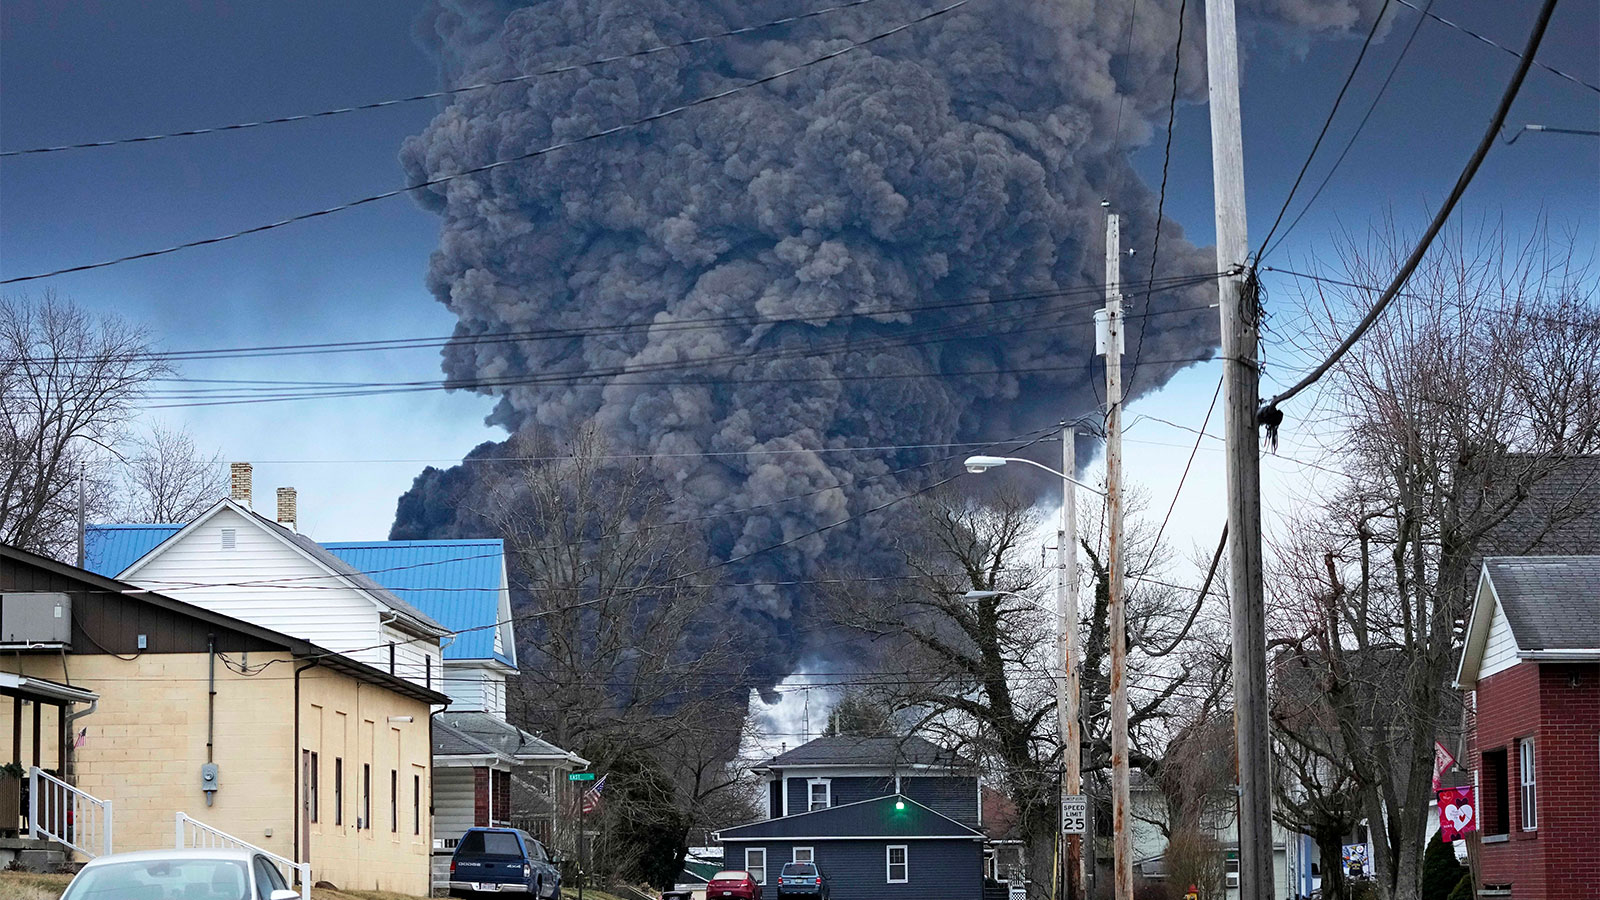 Enormous plume of black smoke billowing up into the sky behind houses on a residential street